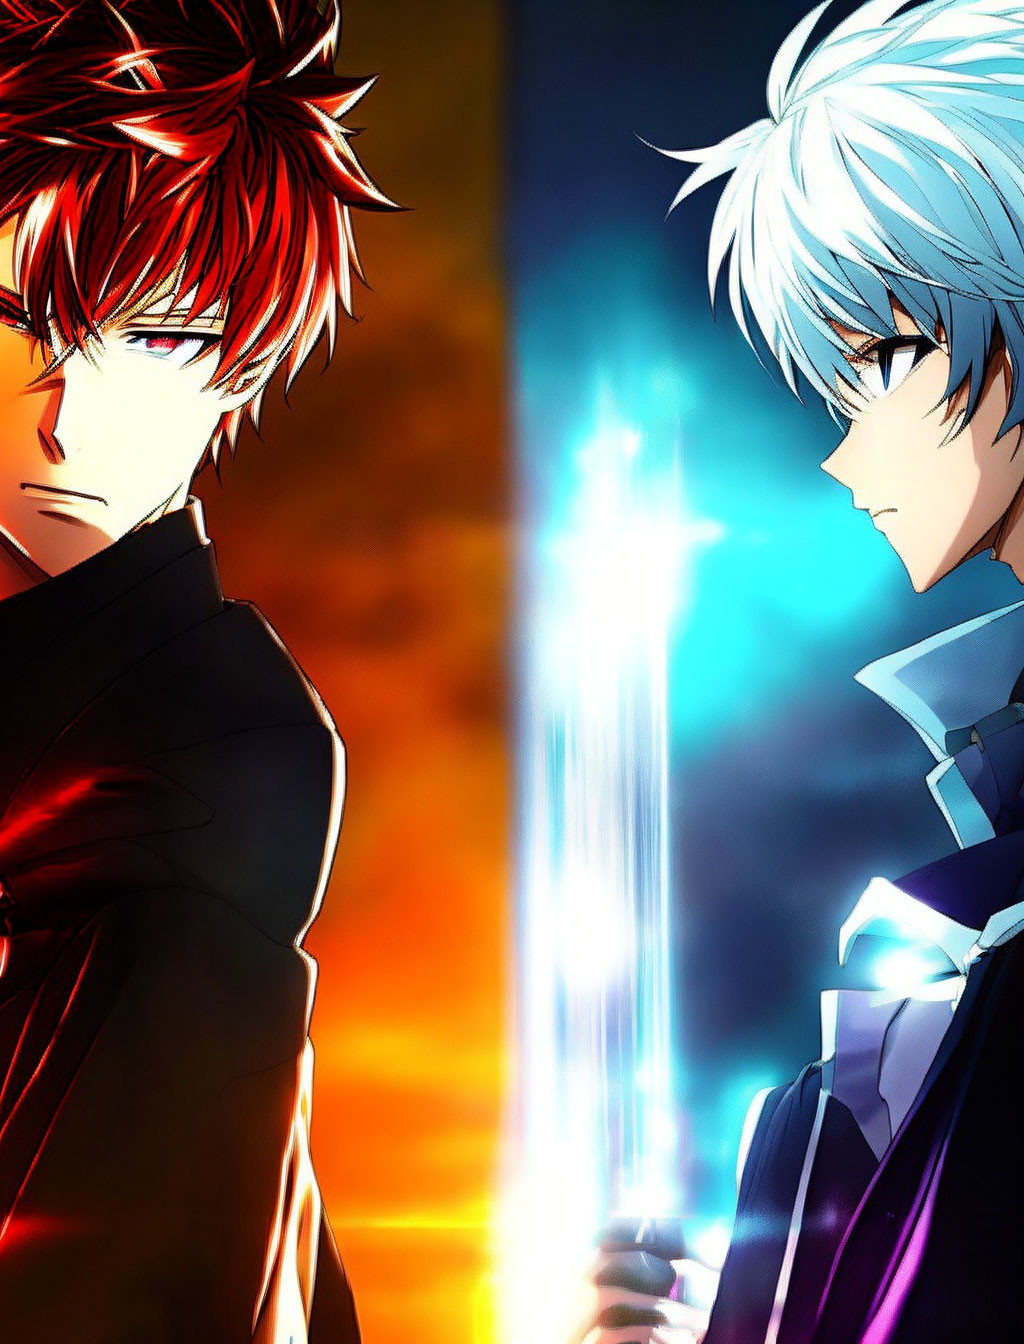 Anime characters with red and white hair in opposing directions against fiery red and cool blue backgrounds.